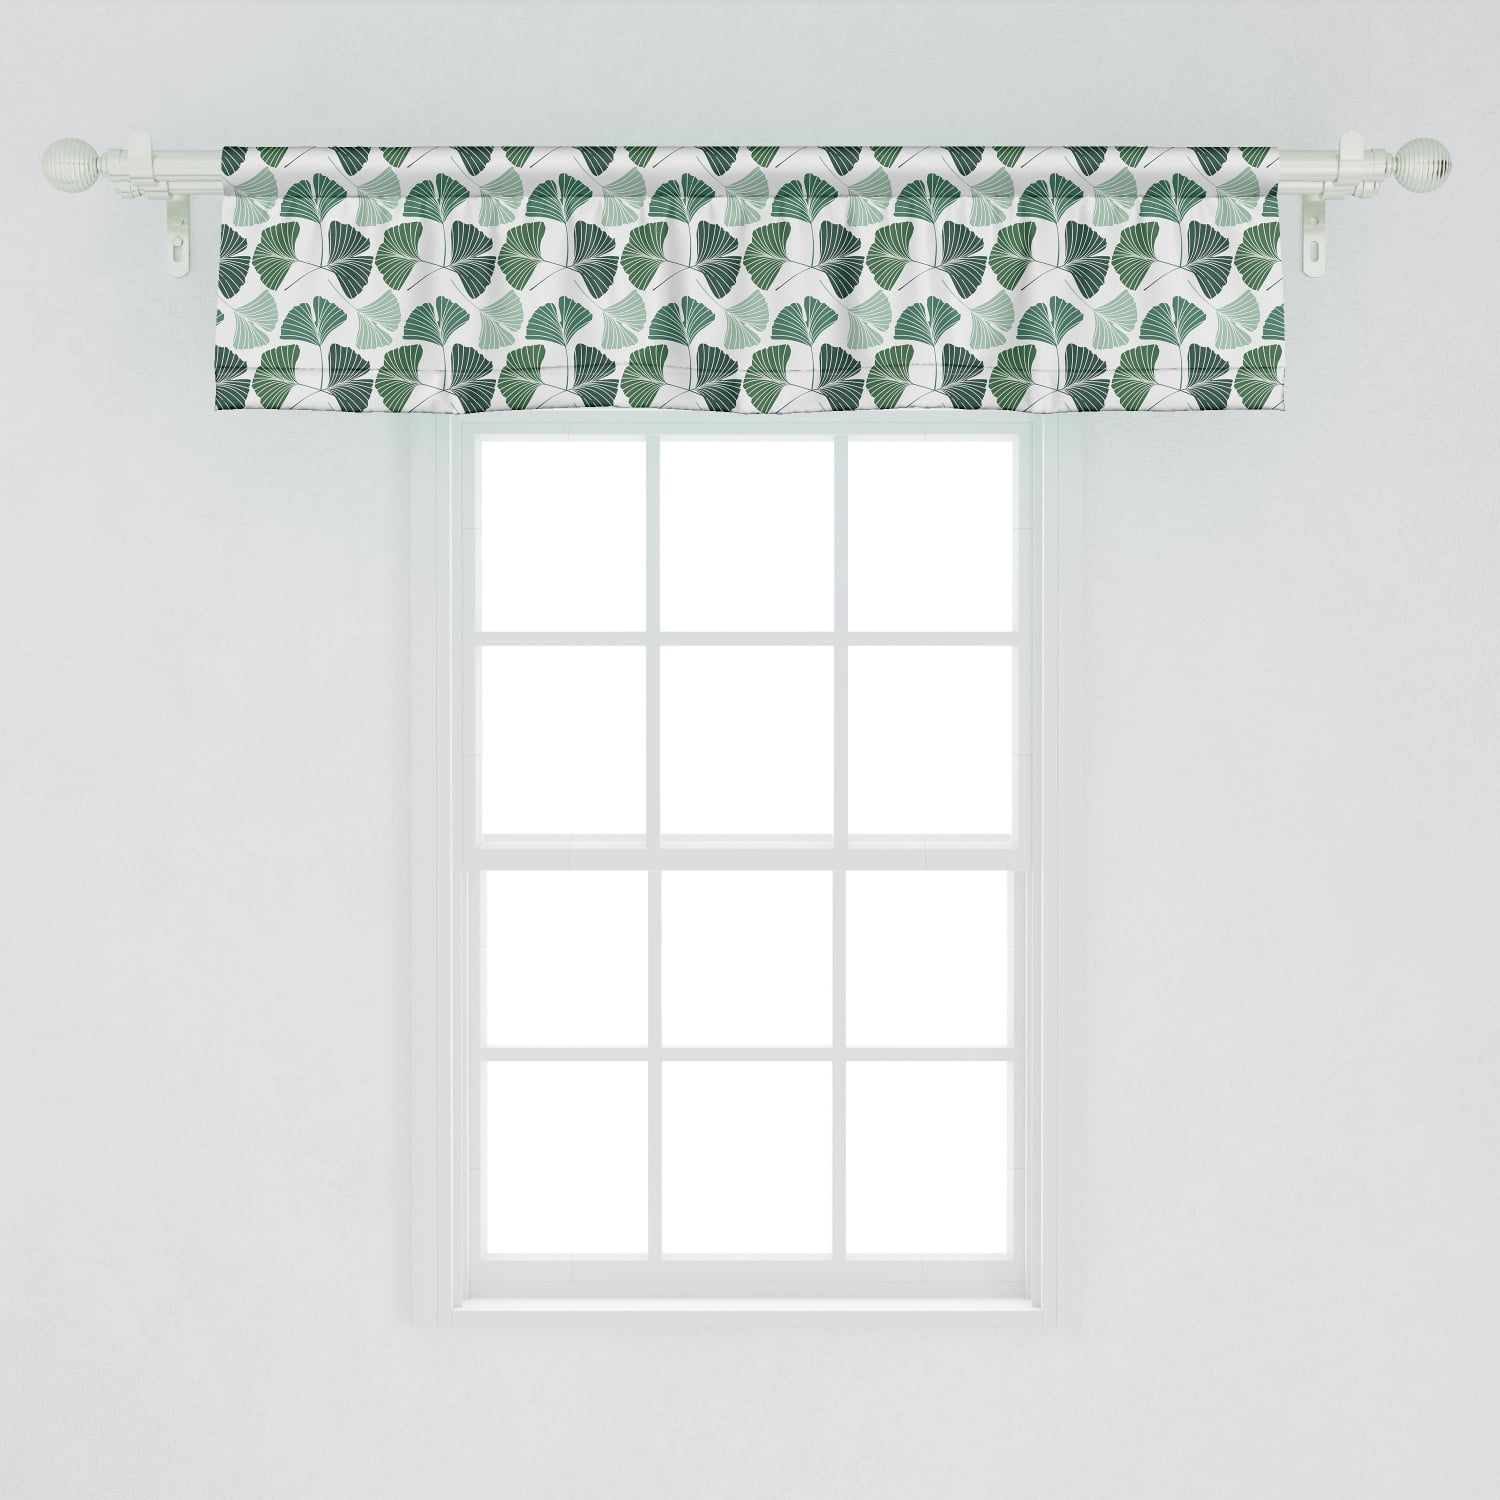 Ambesonne Gingko Window Valance, Mother Nature Ginkgo Biloba Tree Leaves  Homeopathic Therapy Foliage Pattern, Curtain Valance for Kitchen Bedroom ...